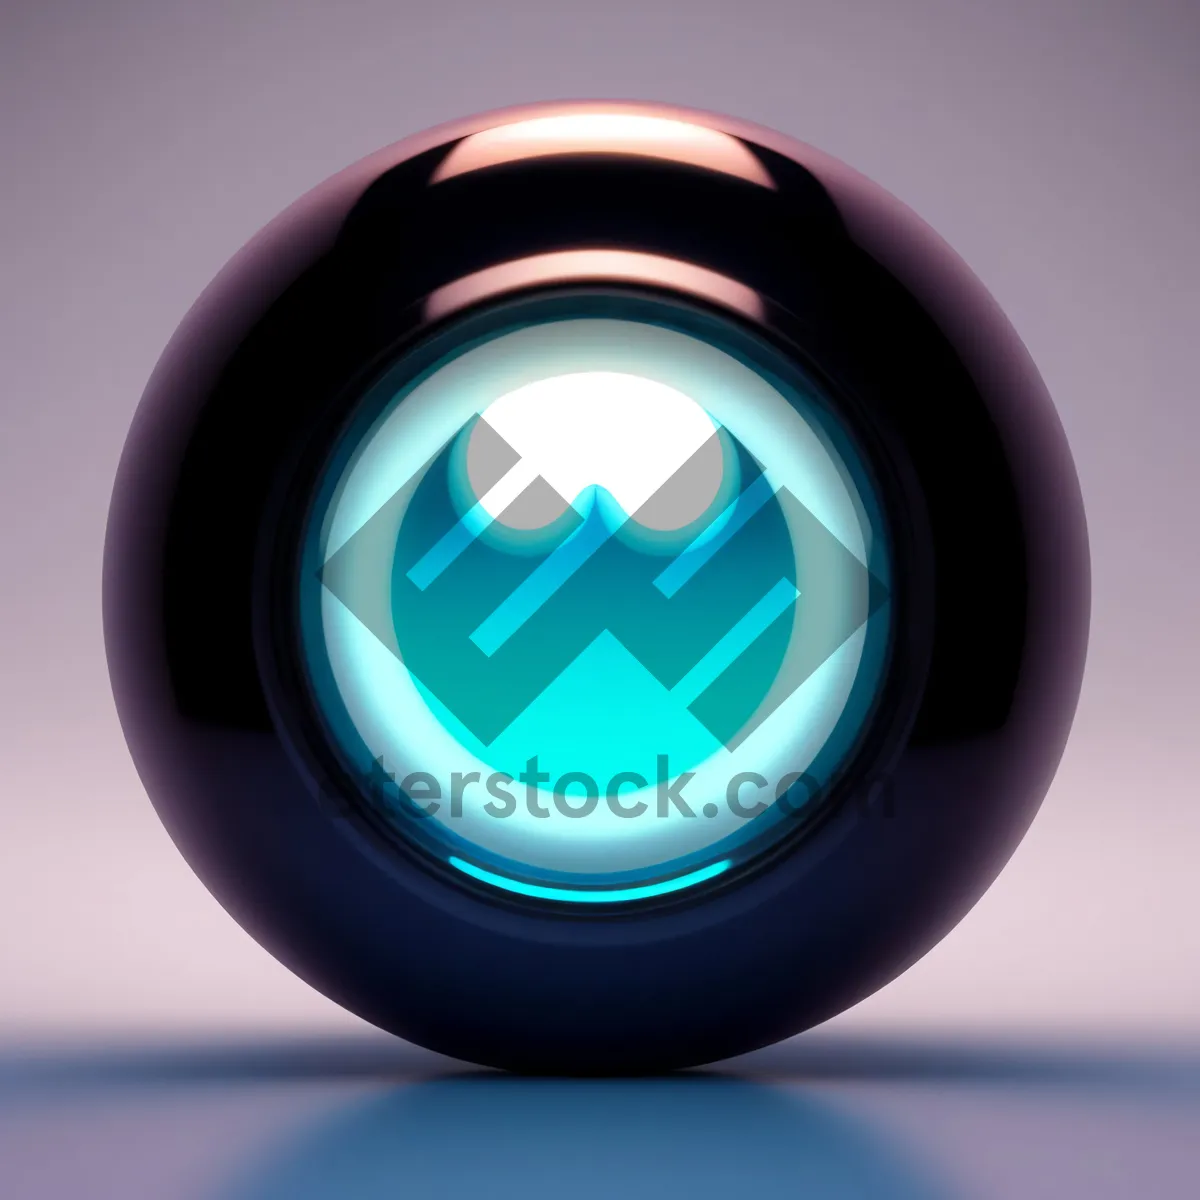 Picture of Glossy Metallic Web Button with Reflection